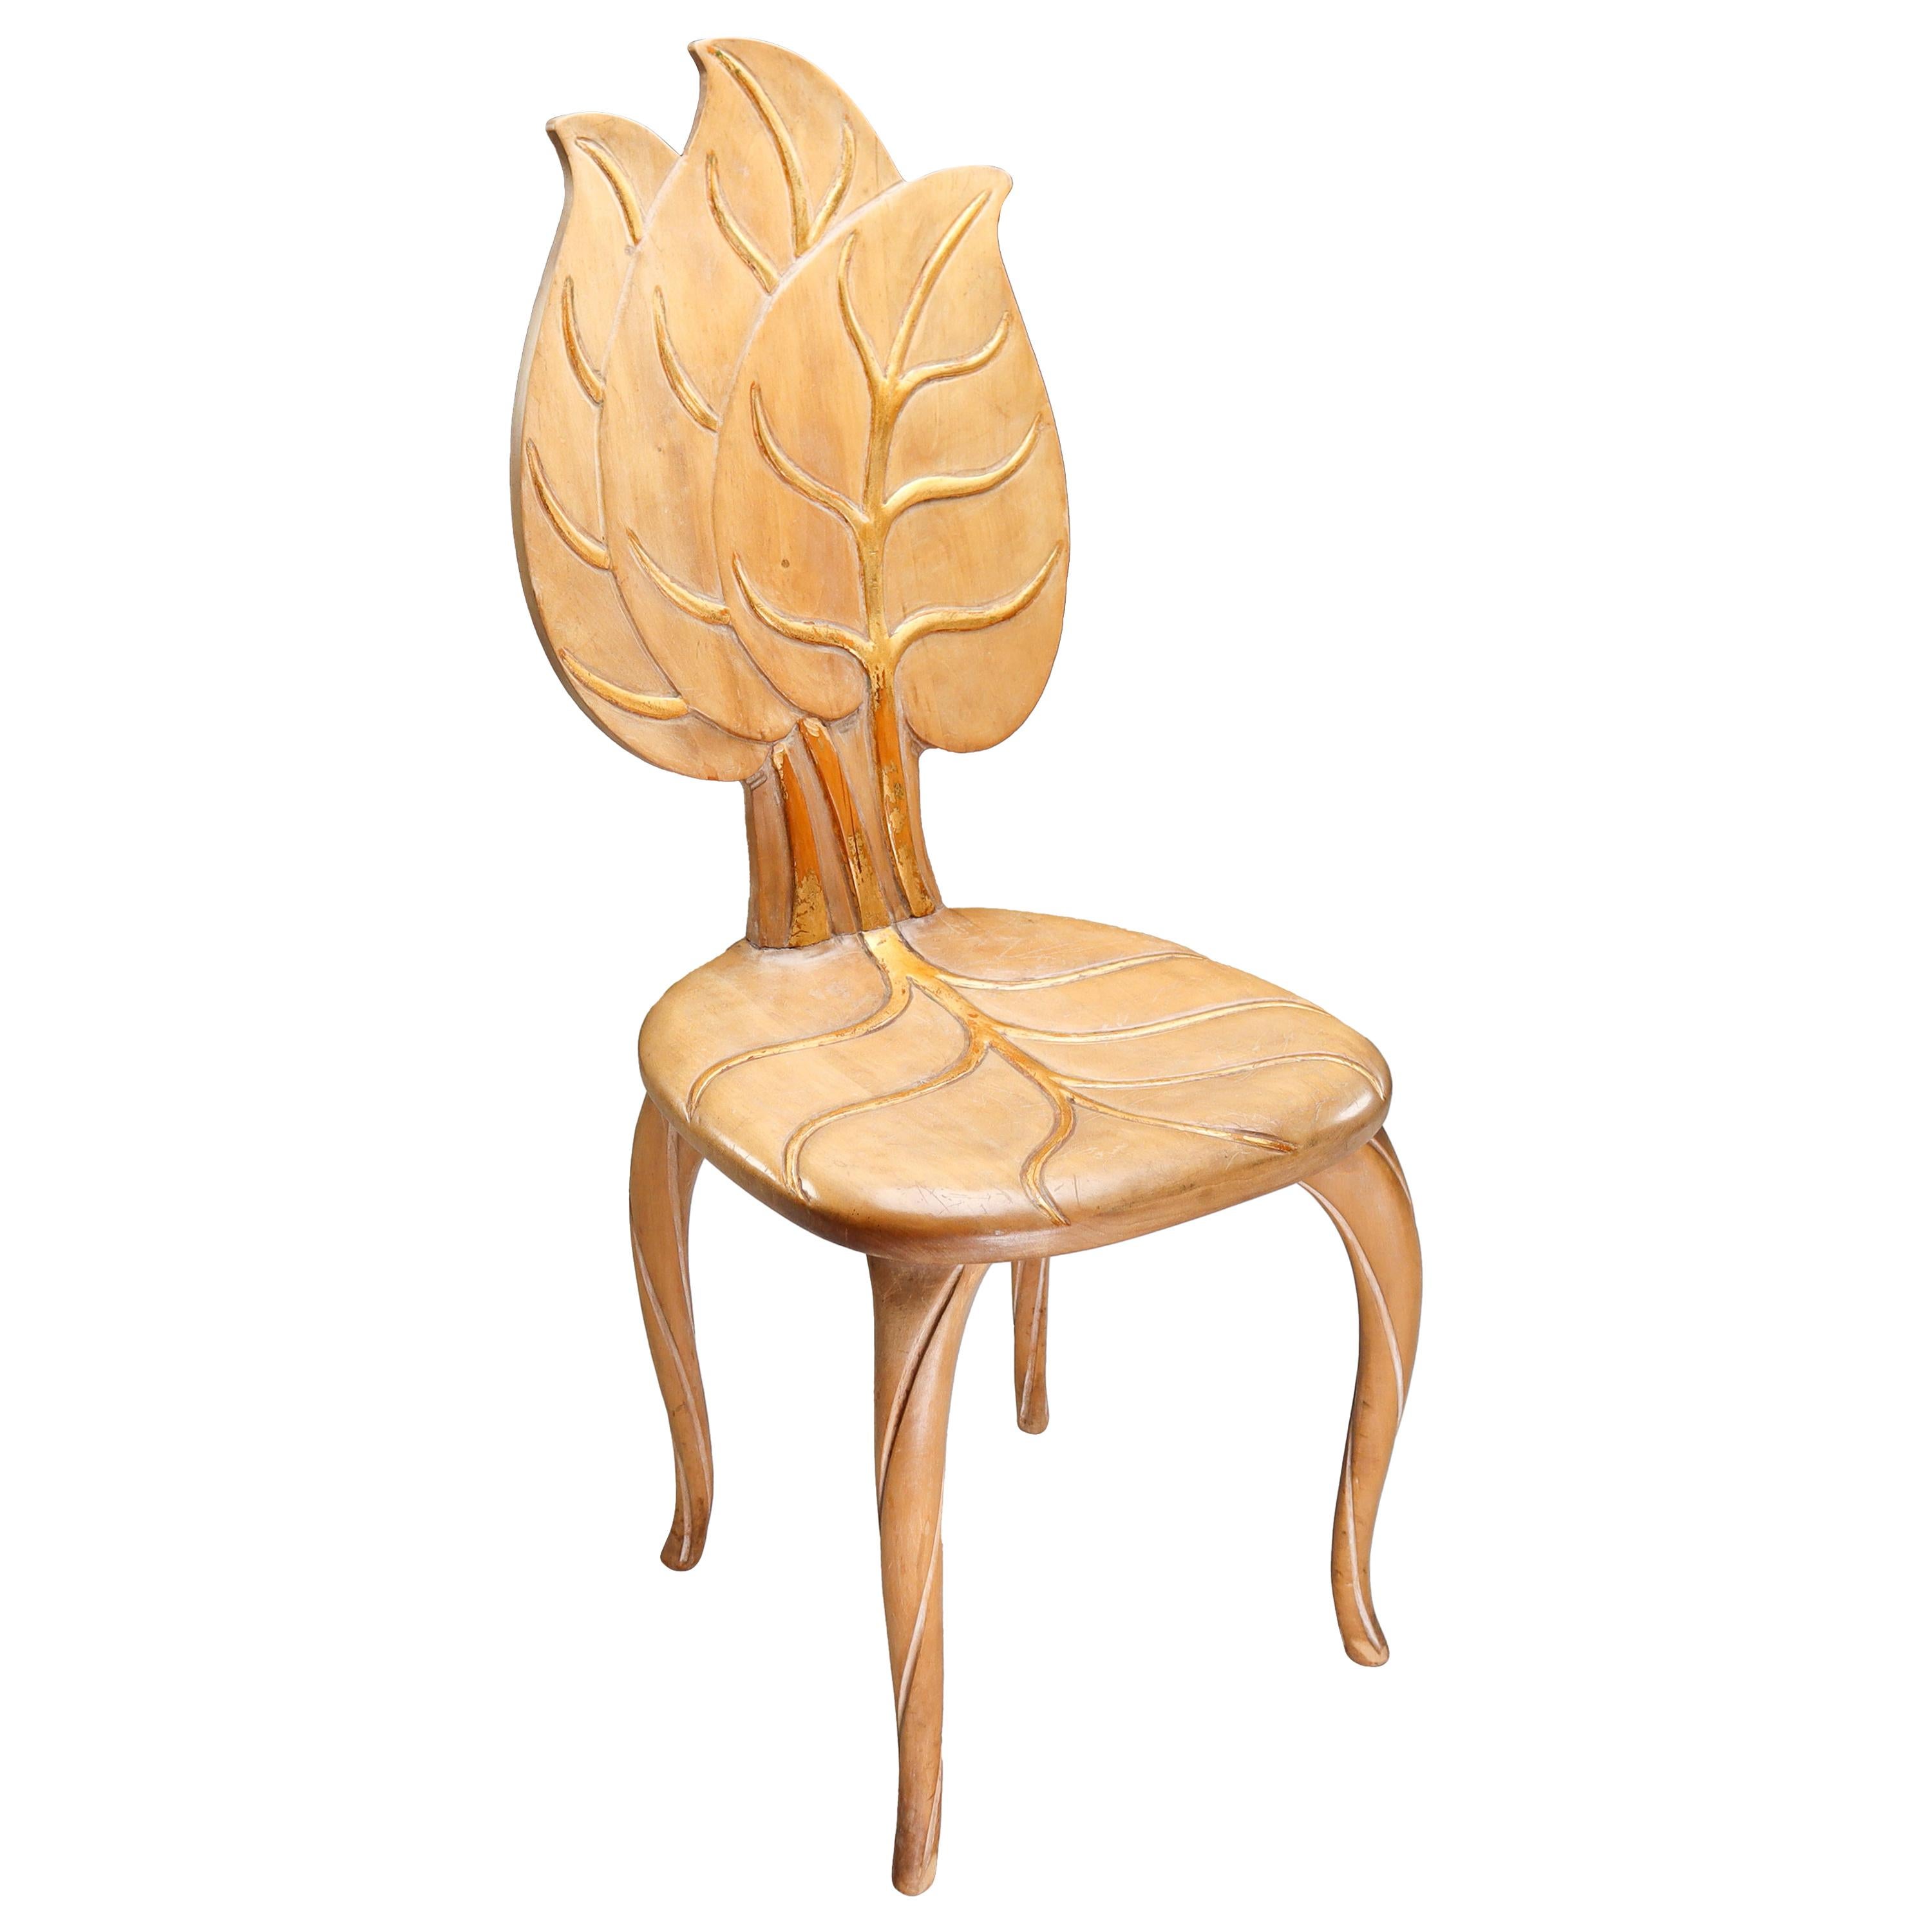 Bartolozzi & Maioli Wooden and Gold Leaf Chair, Italy, 1970s